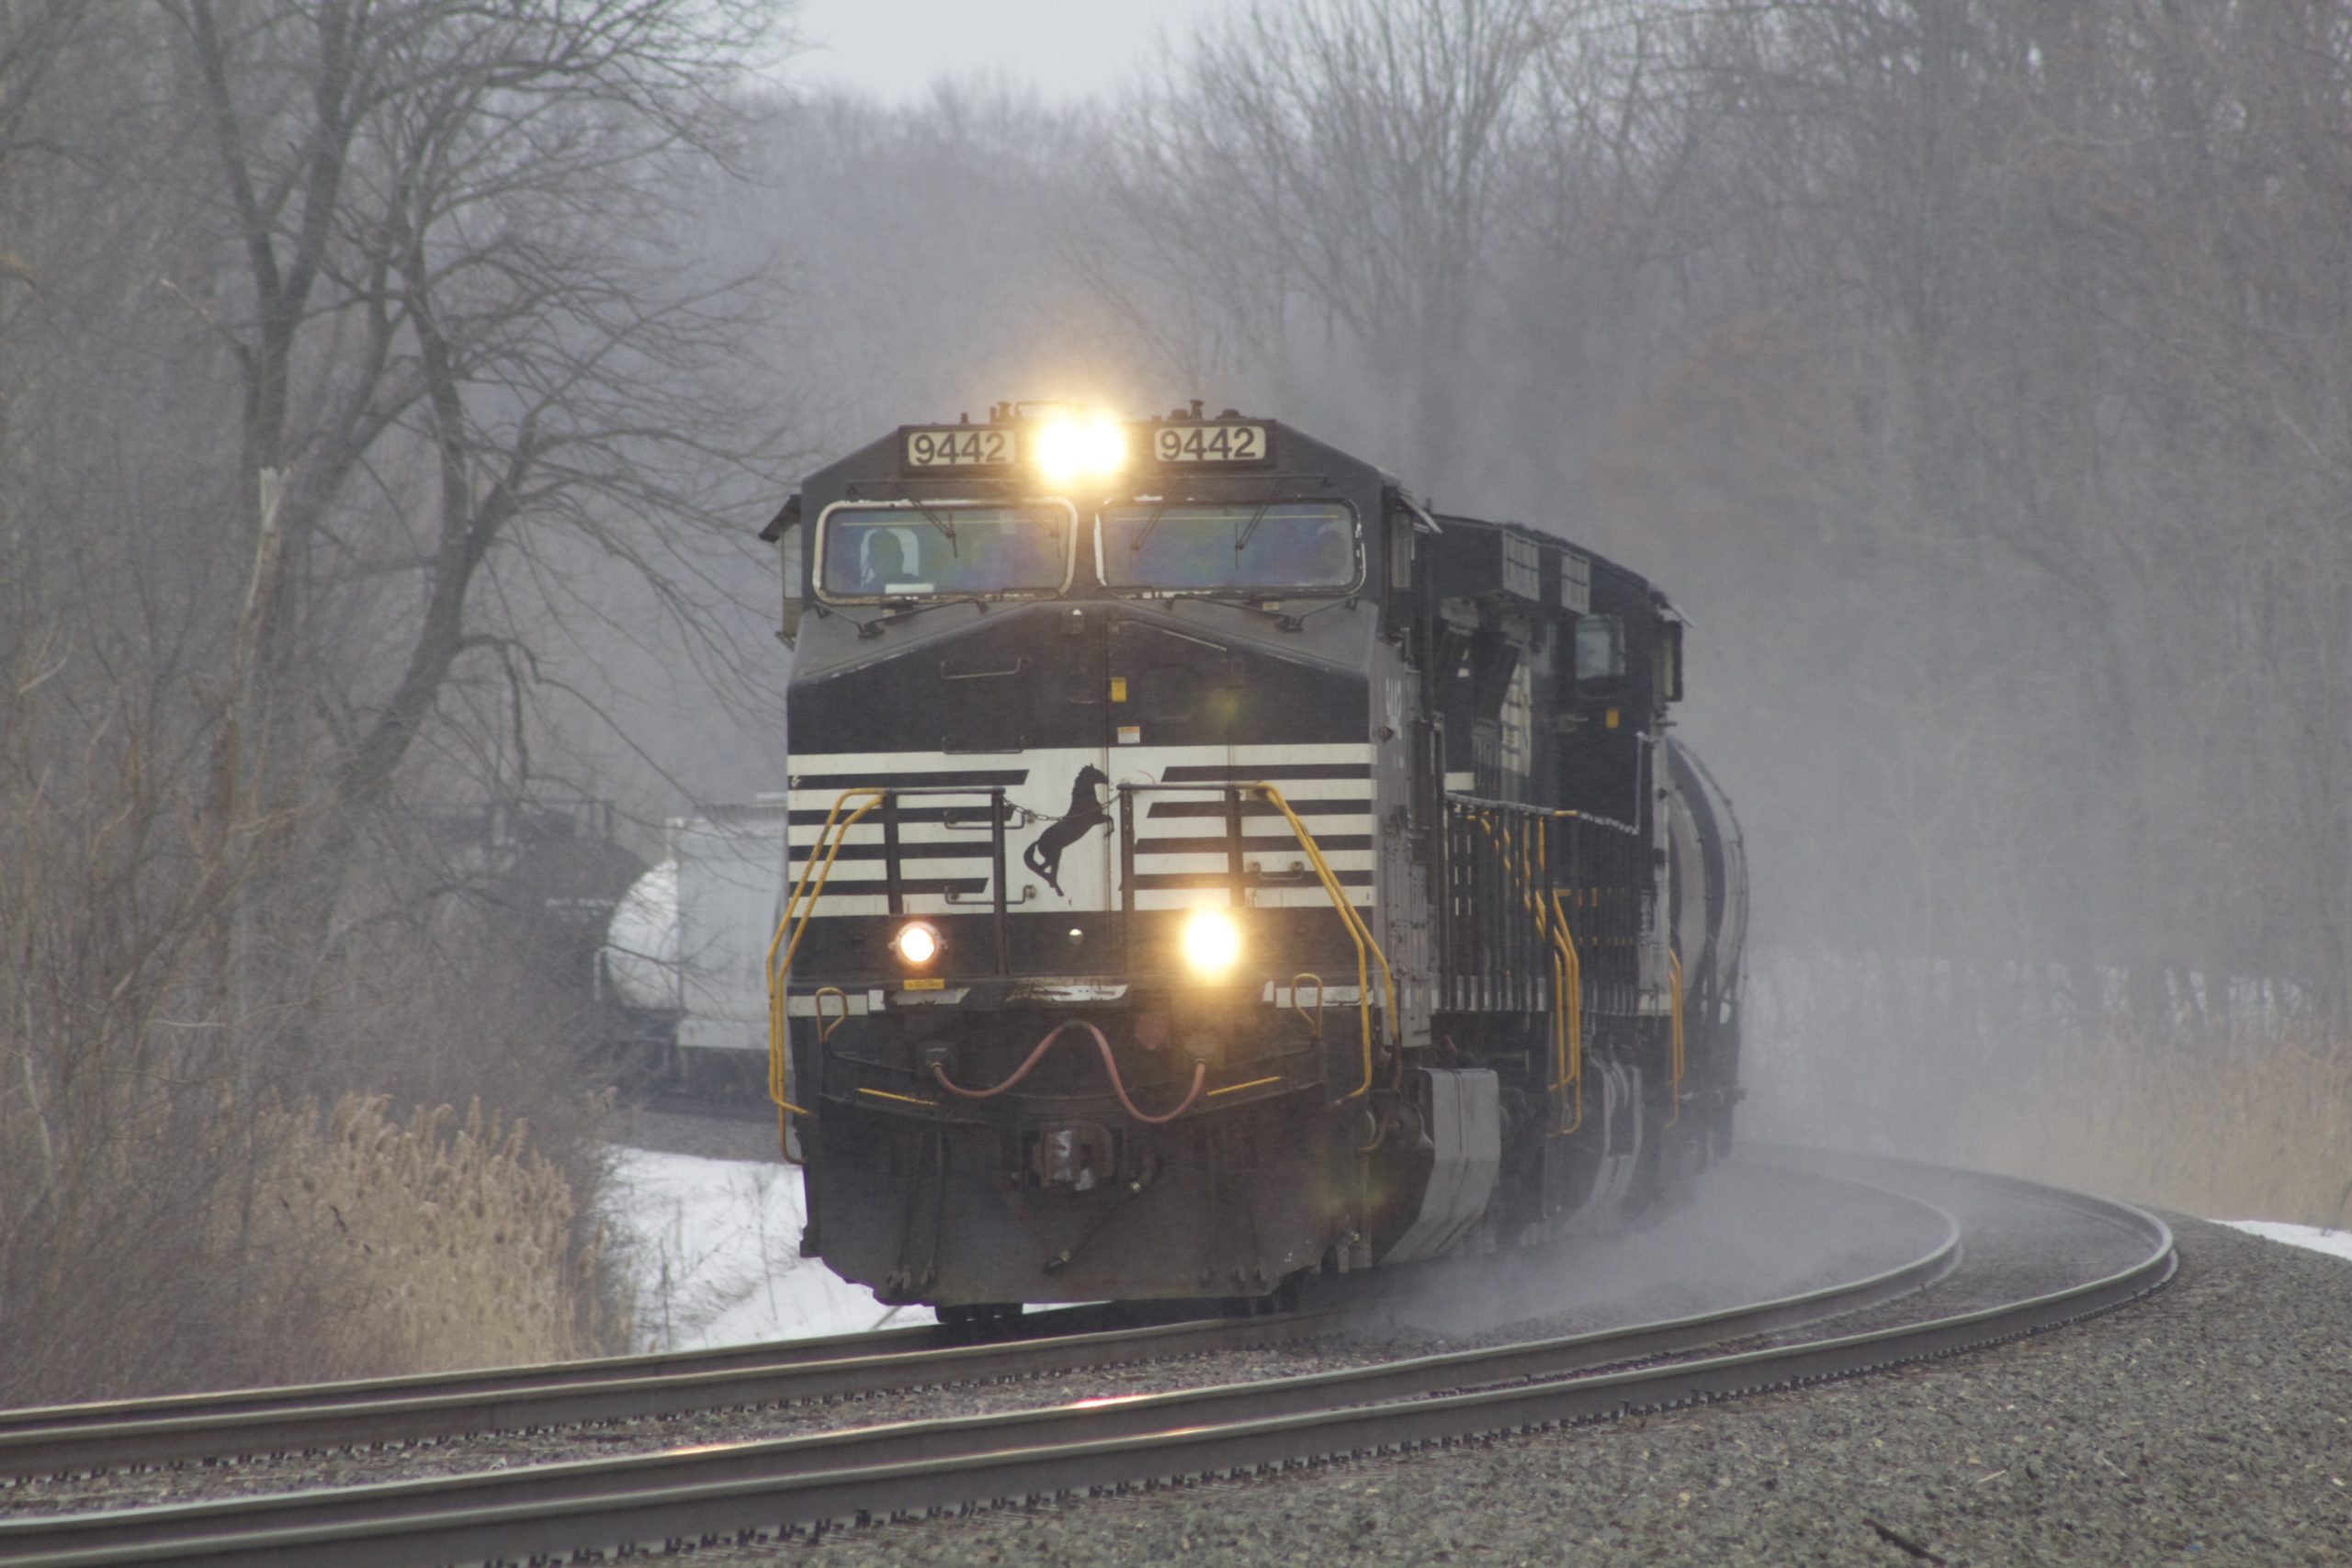 A black and white painted Norfolk Southern locomotive leads a train along NS tracks through a slightly foggy winter afternoon.